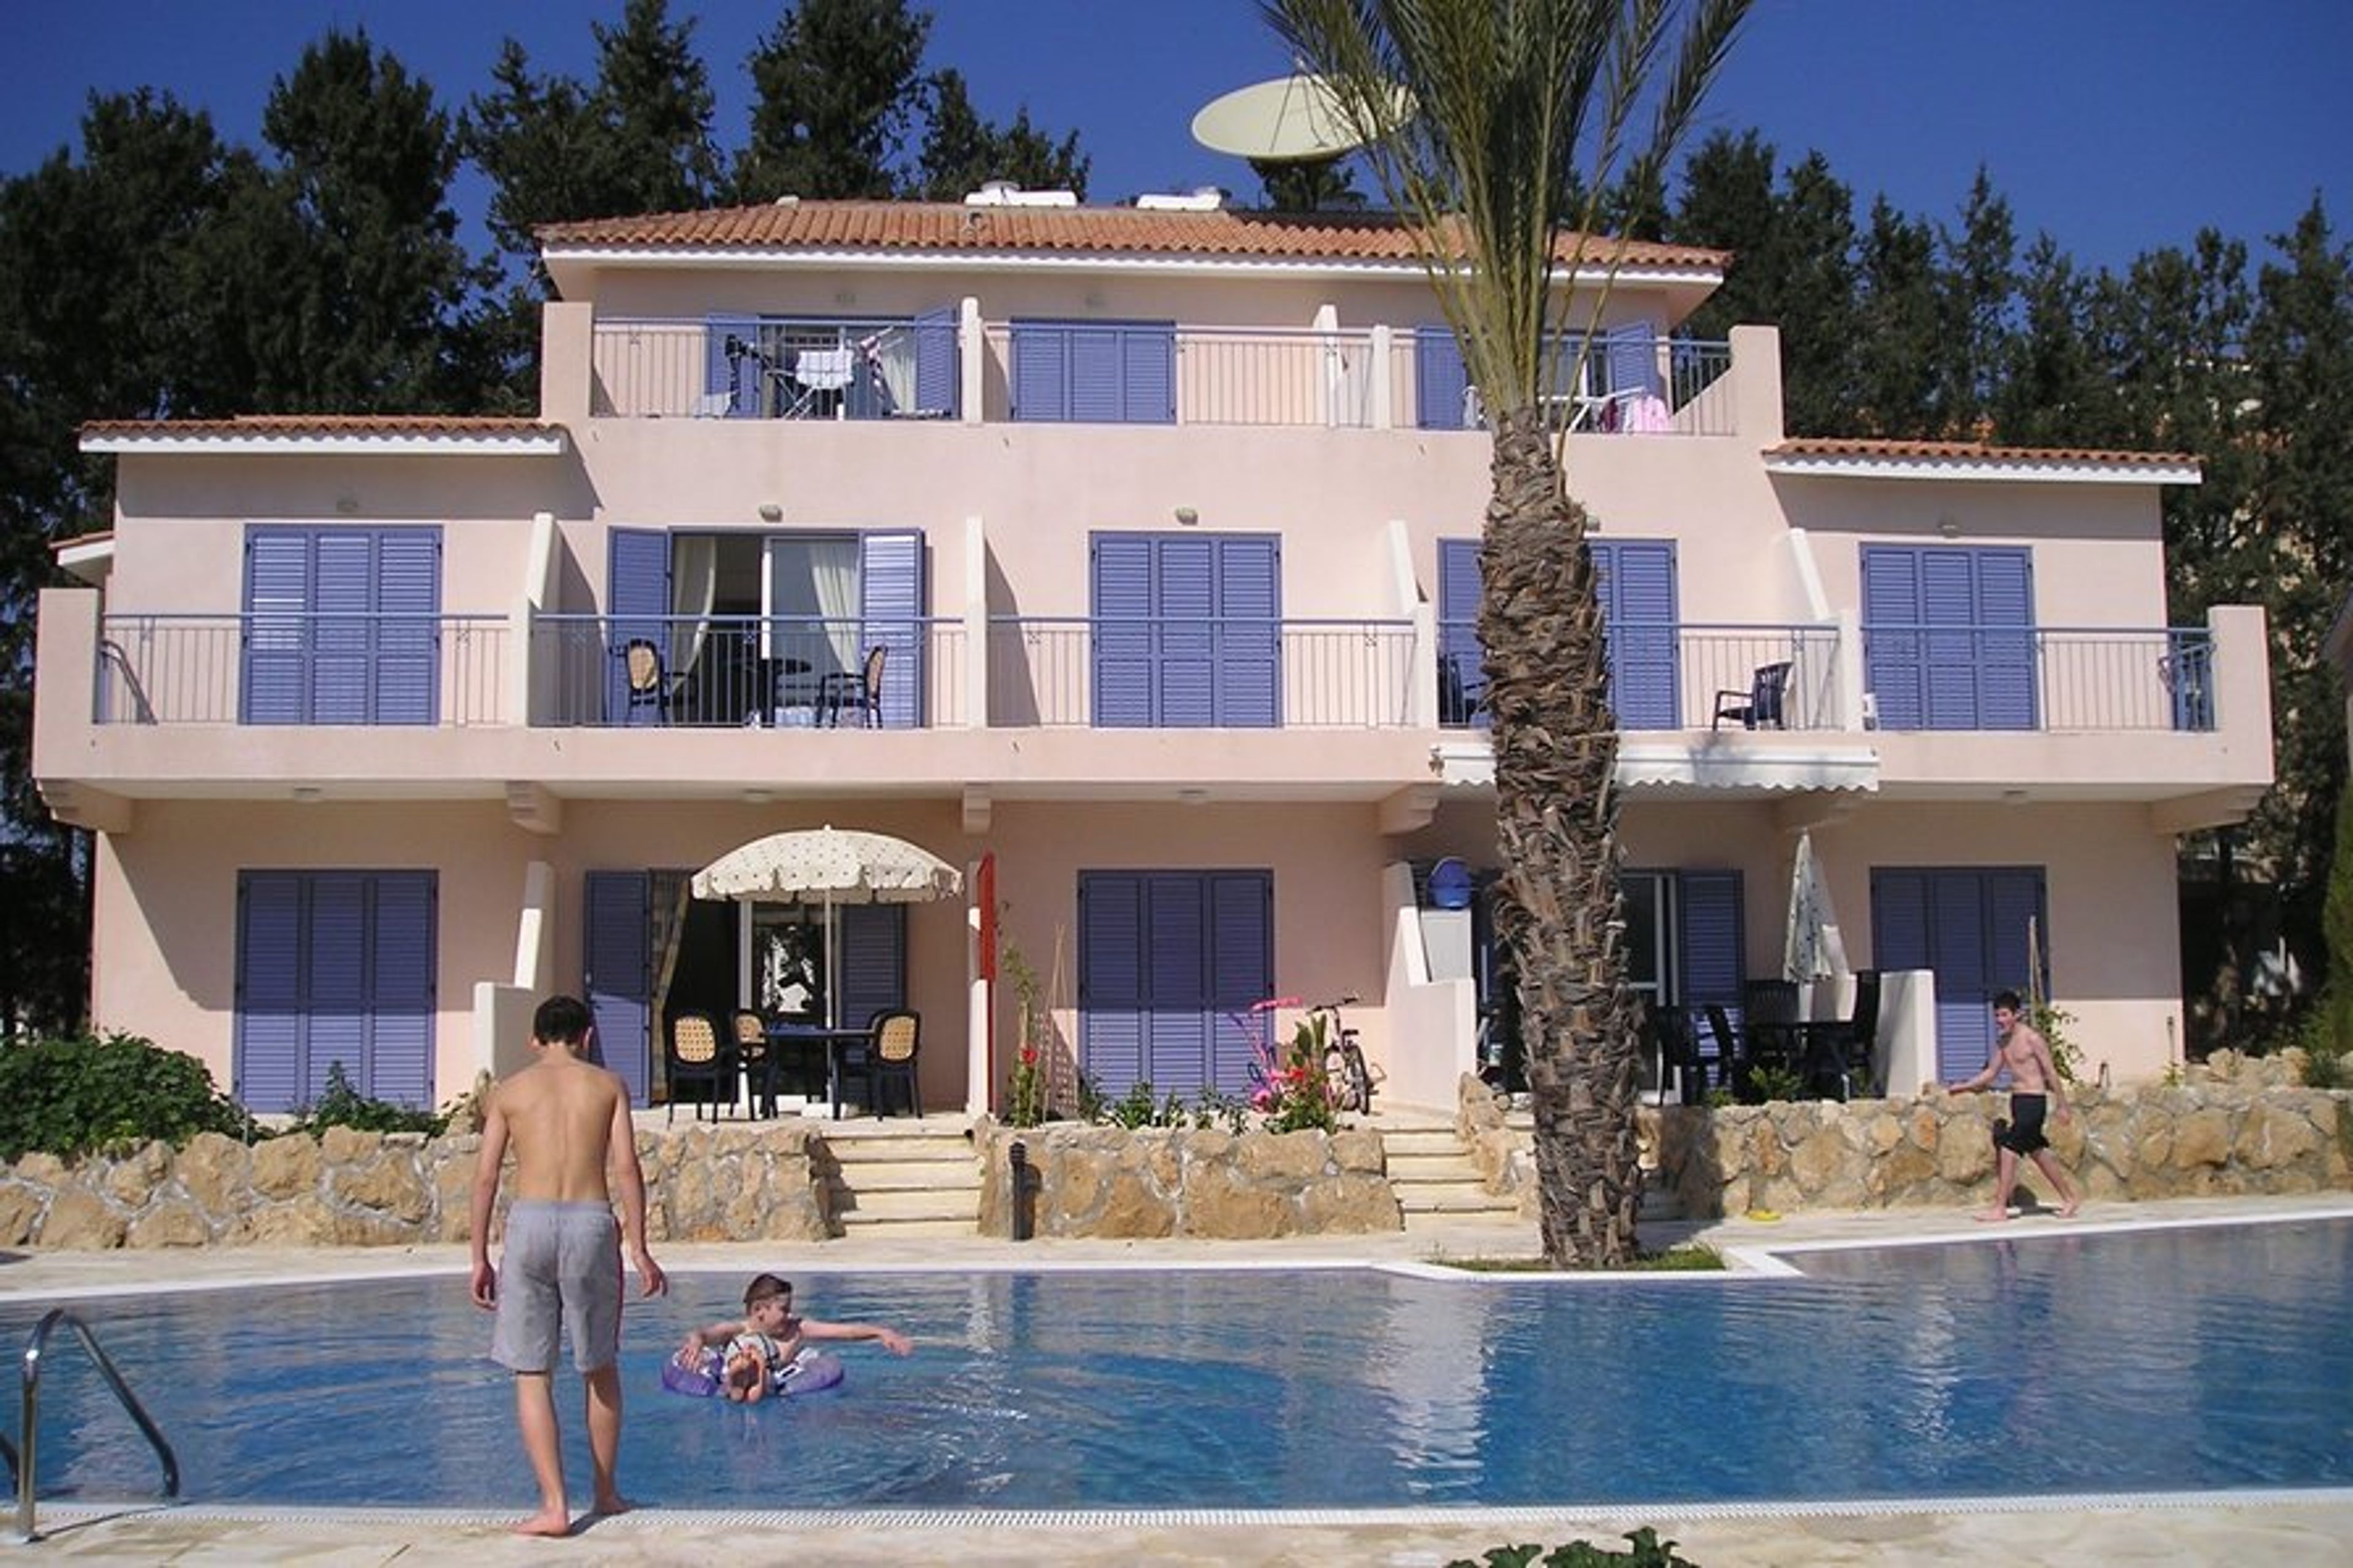 Paradise Villa - 3 bed villa with direct access to large shared pool